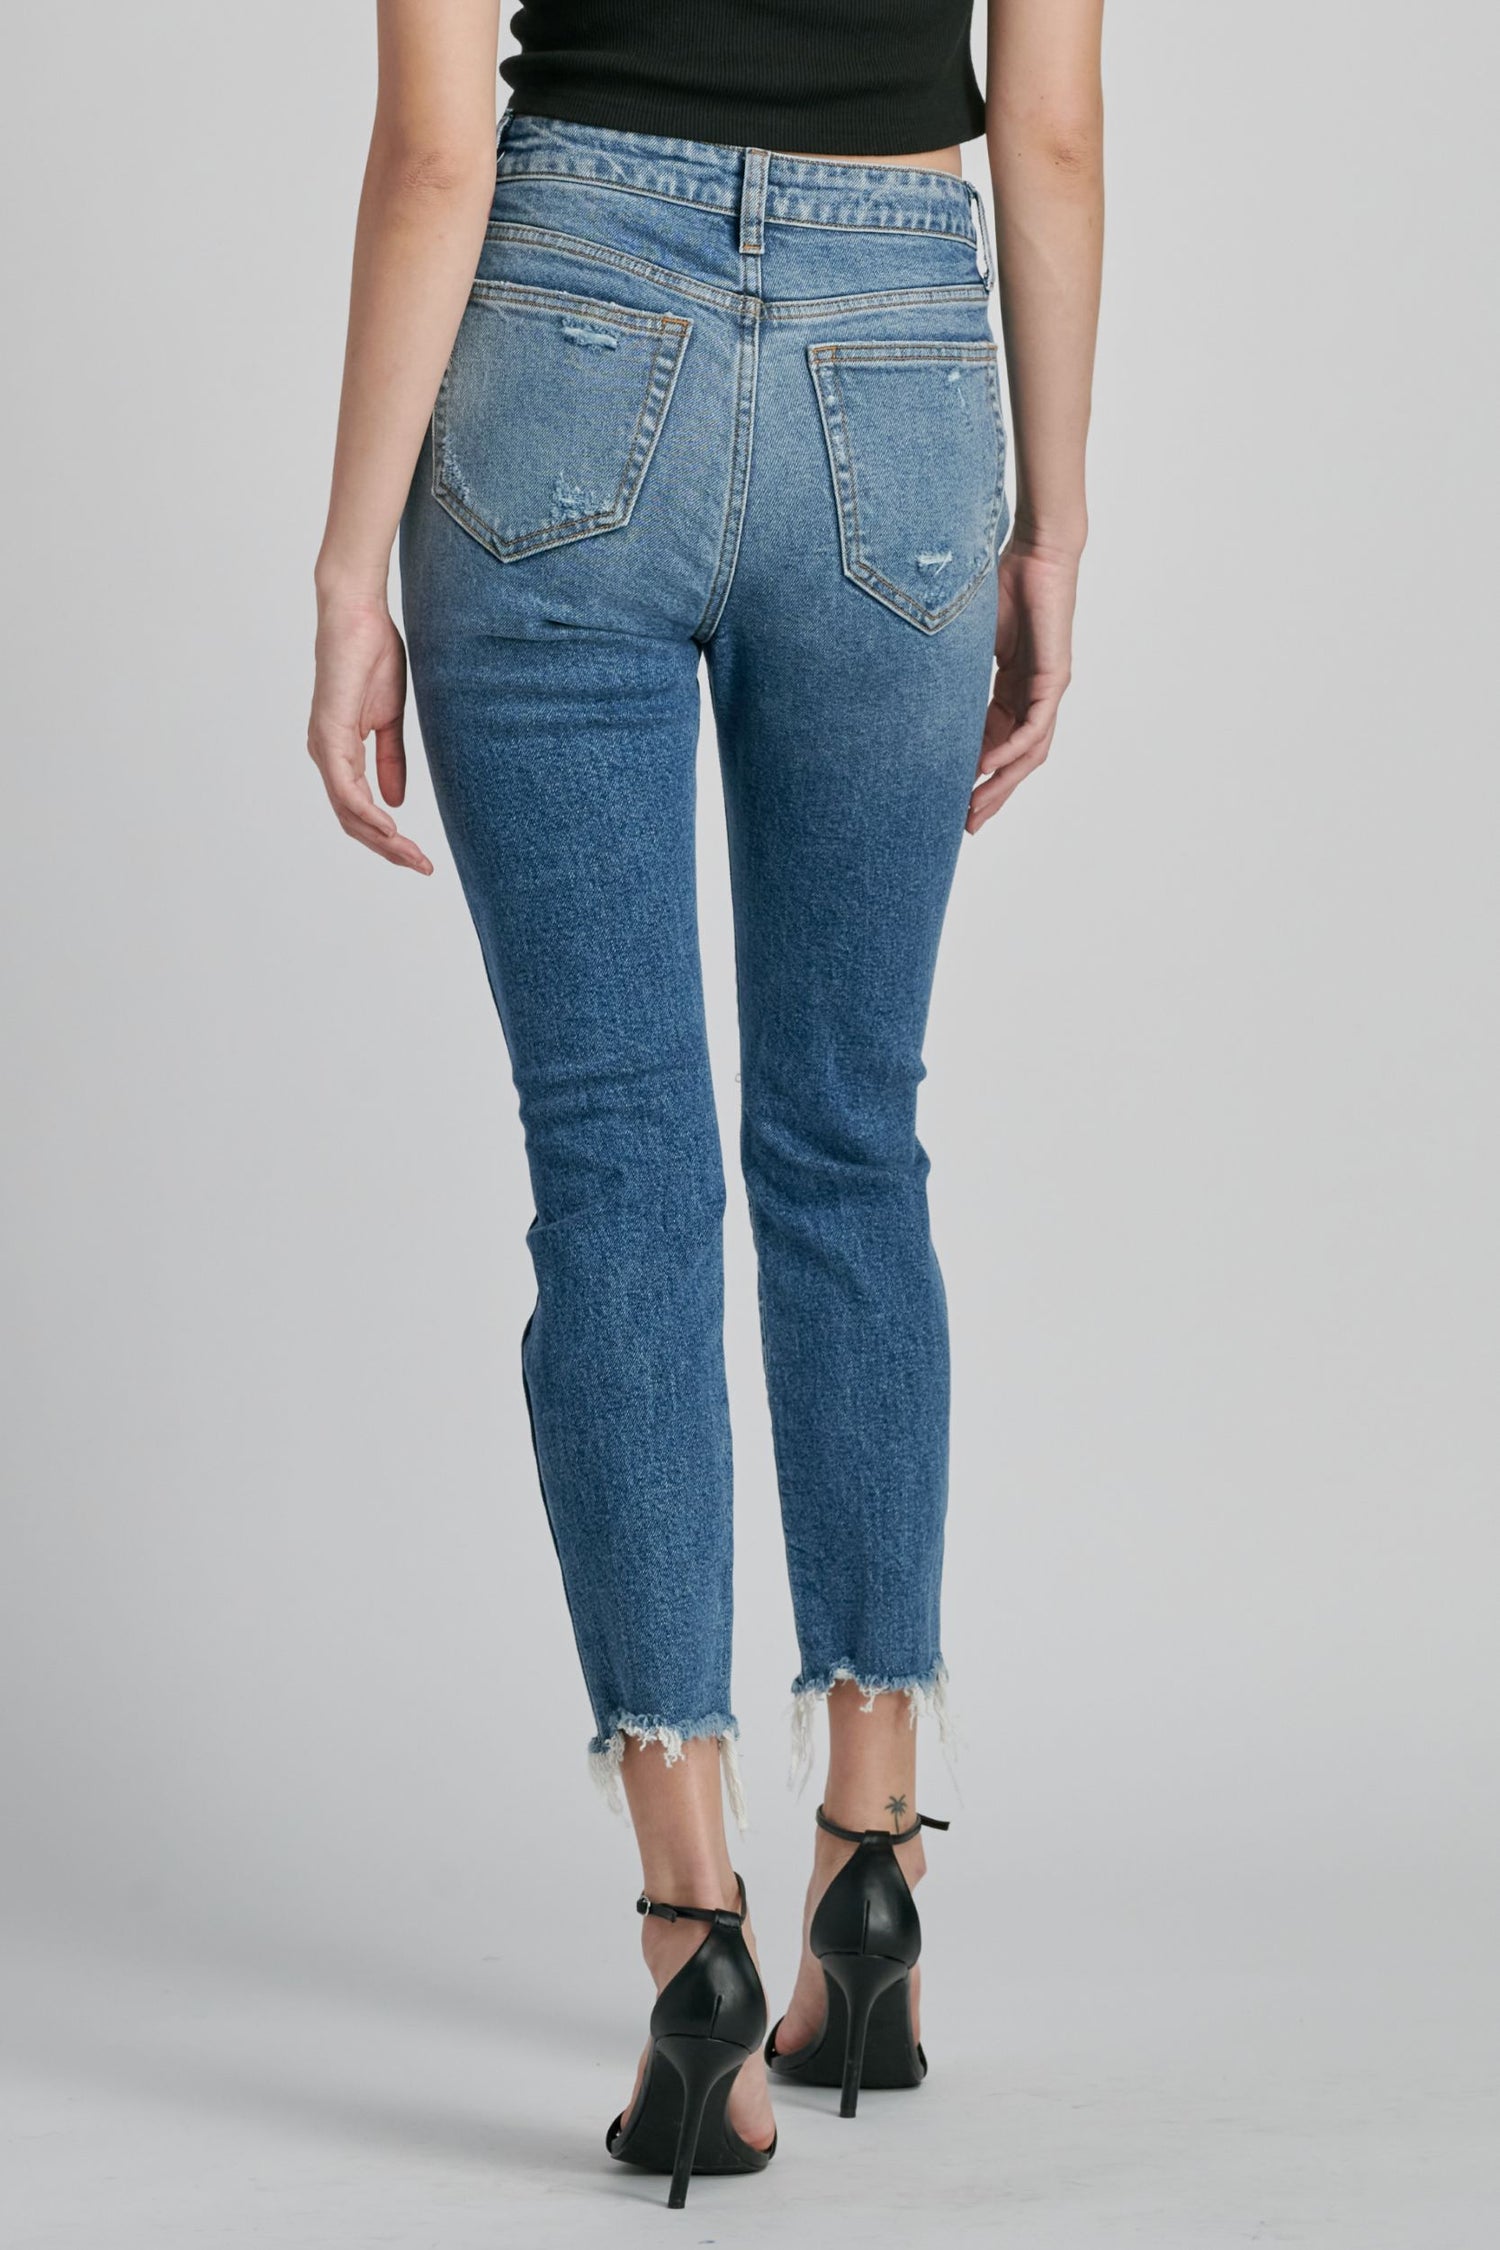 Cello Madison High Rise Mom Skinny Jean - Weeping Willow Boutique